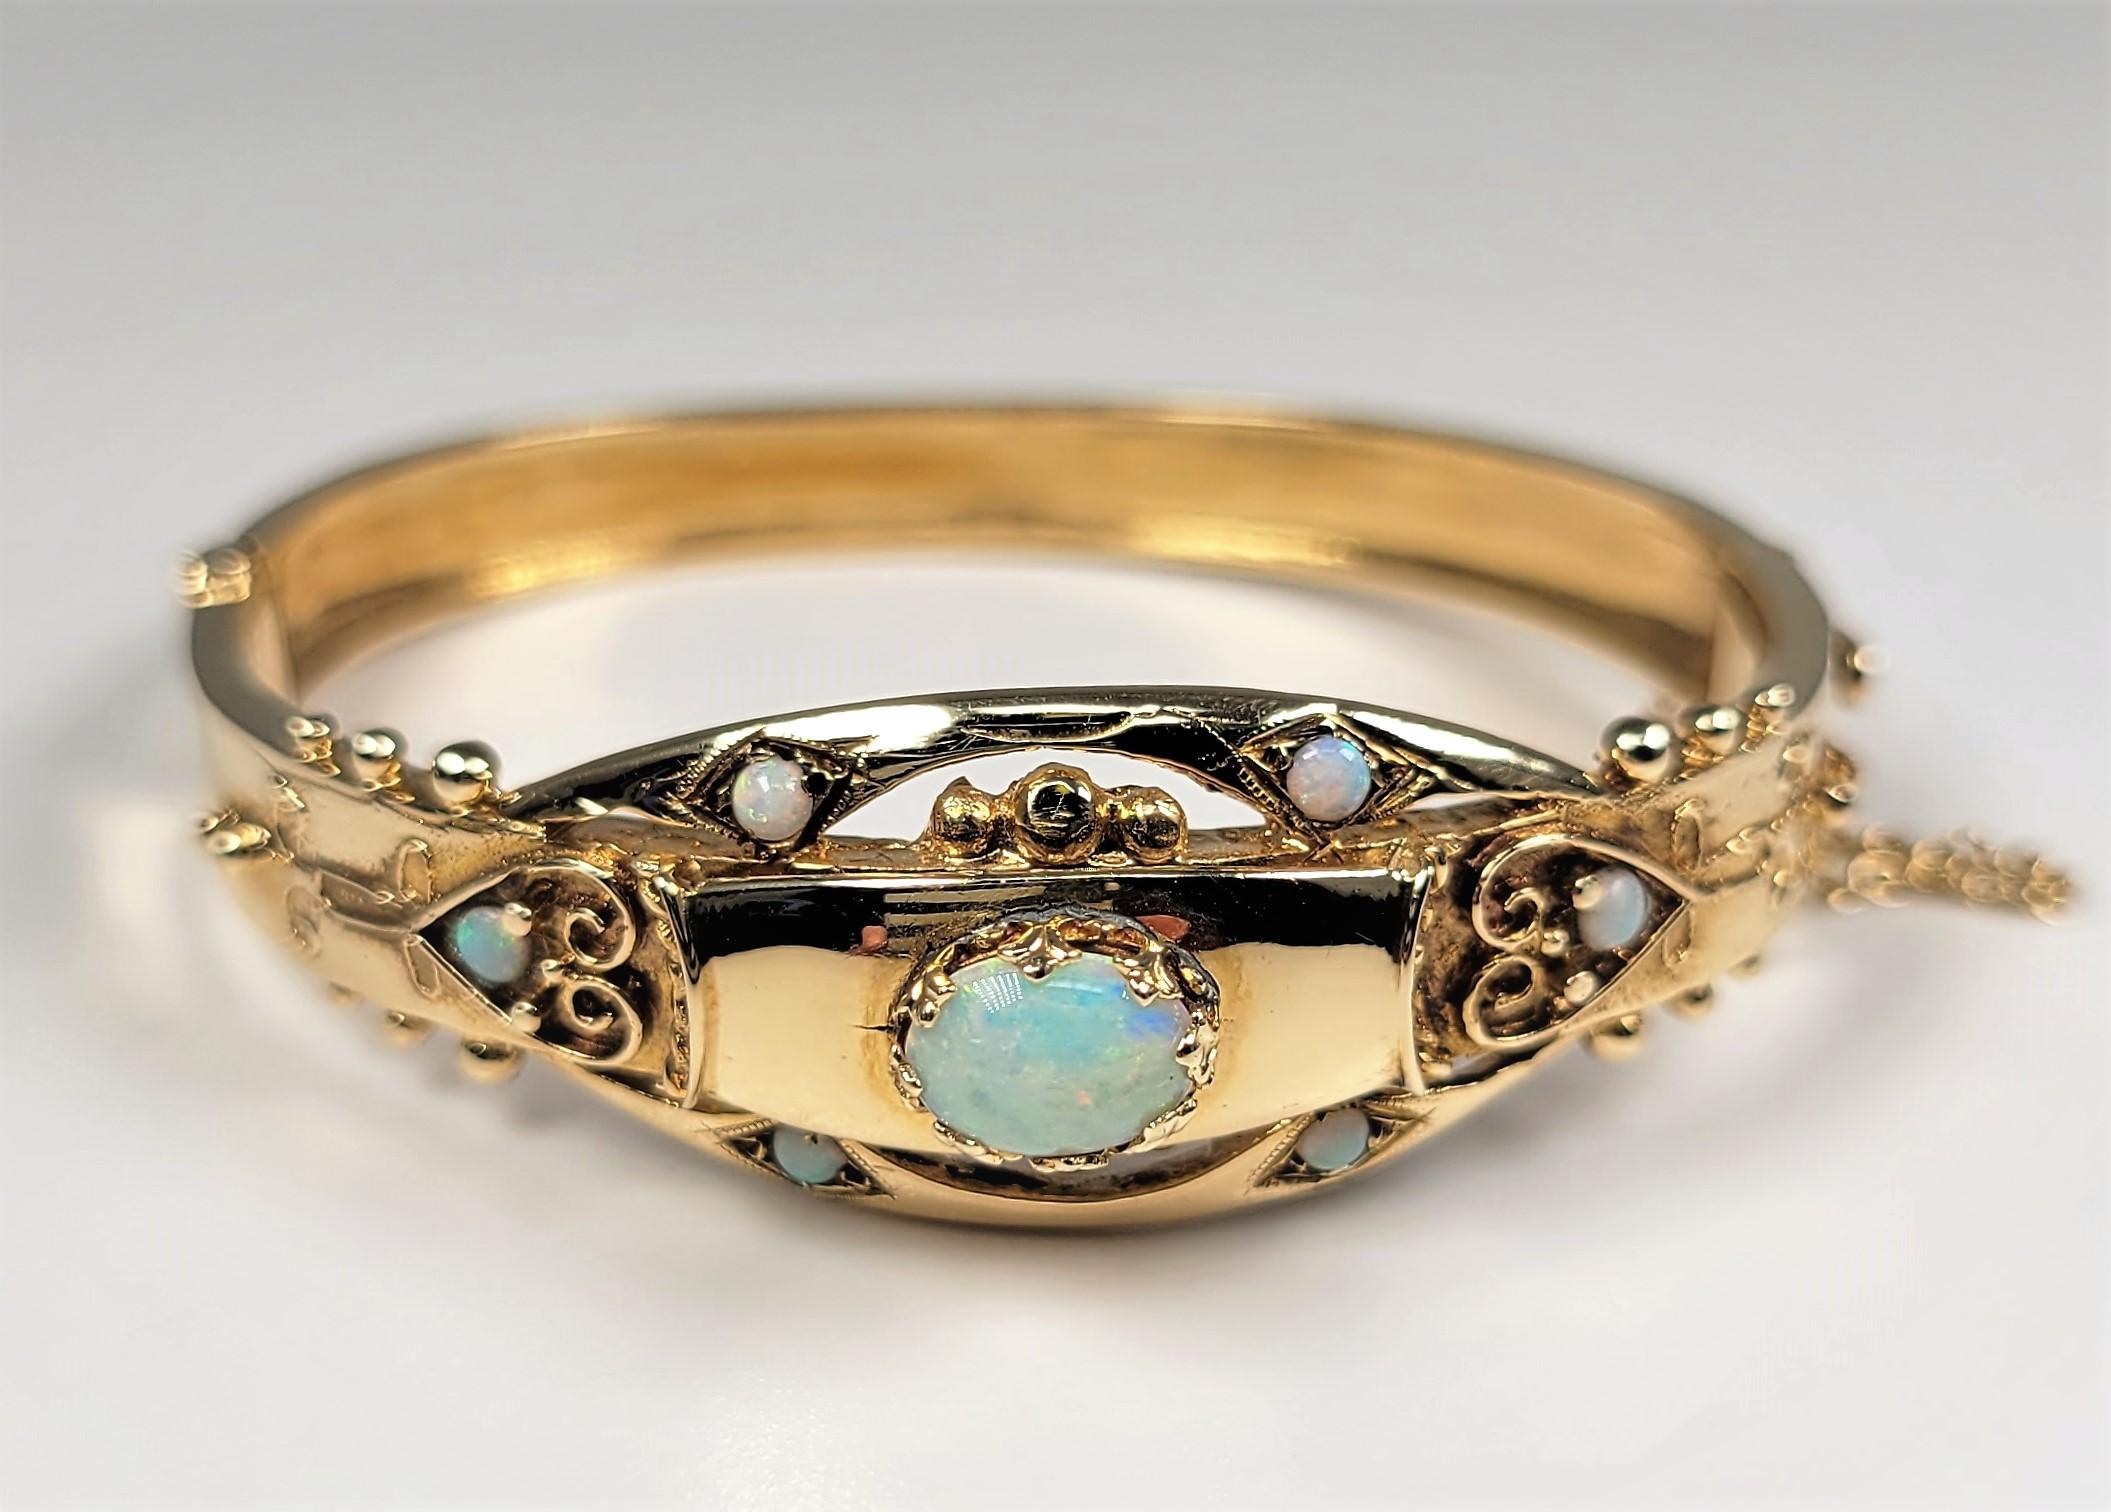 14 Karat yellow gold bangle with opal center stone and opal accents.  This charming bracelet is from the 1950's.